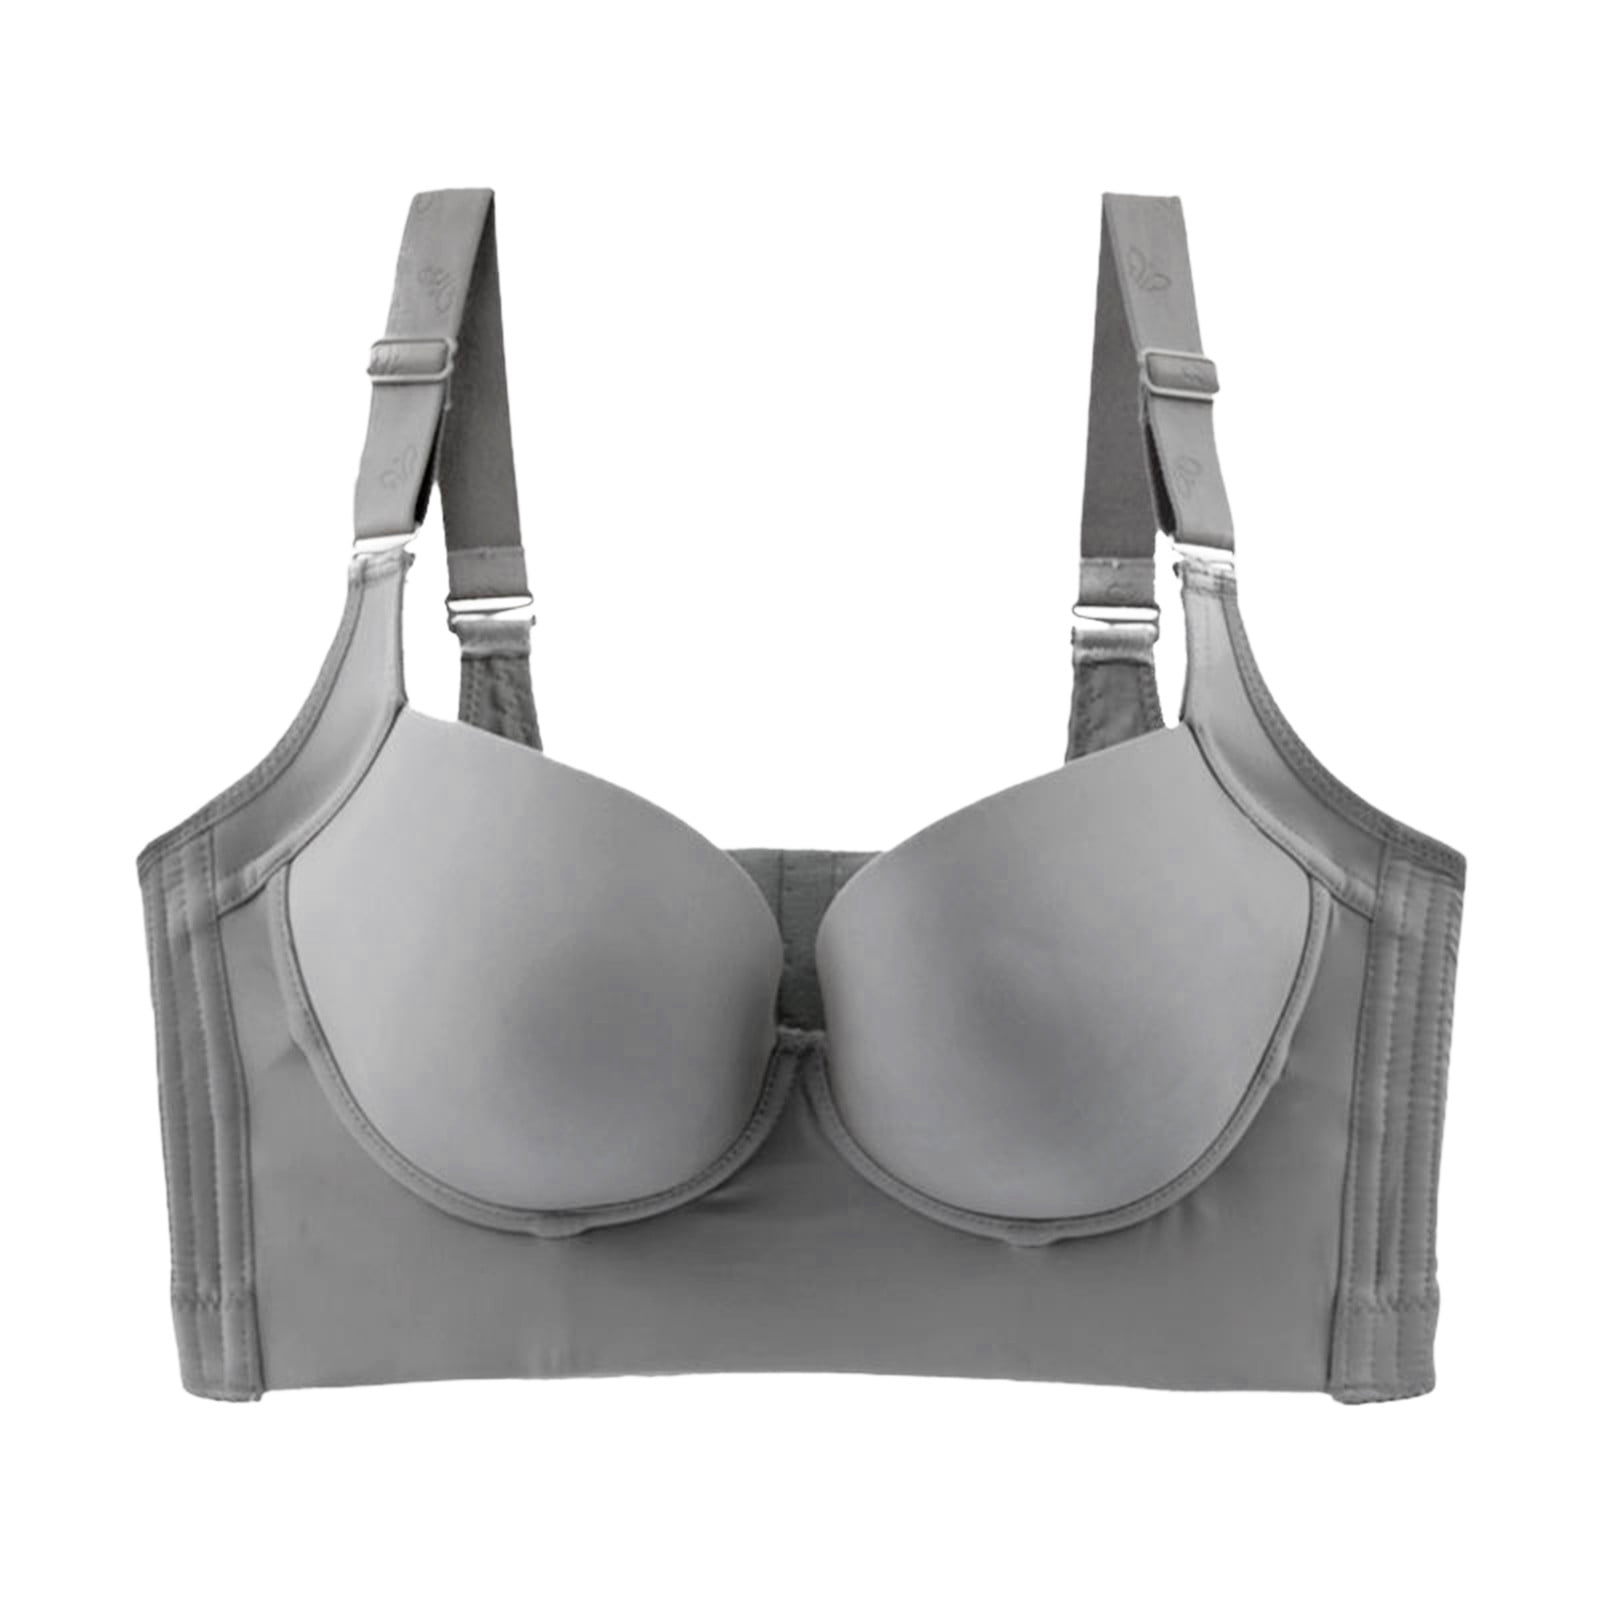 TOWED22 Plus Size Bras,Women's High Impact Removable Pads Sports Bra  Underwire Full Coverage Support Workout Running Bra,Grey 